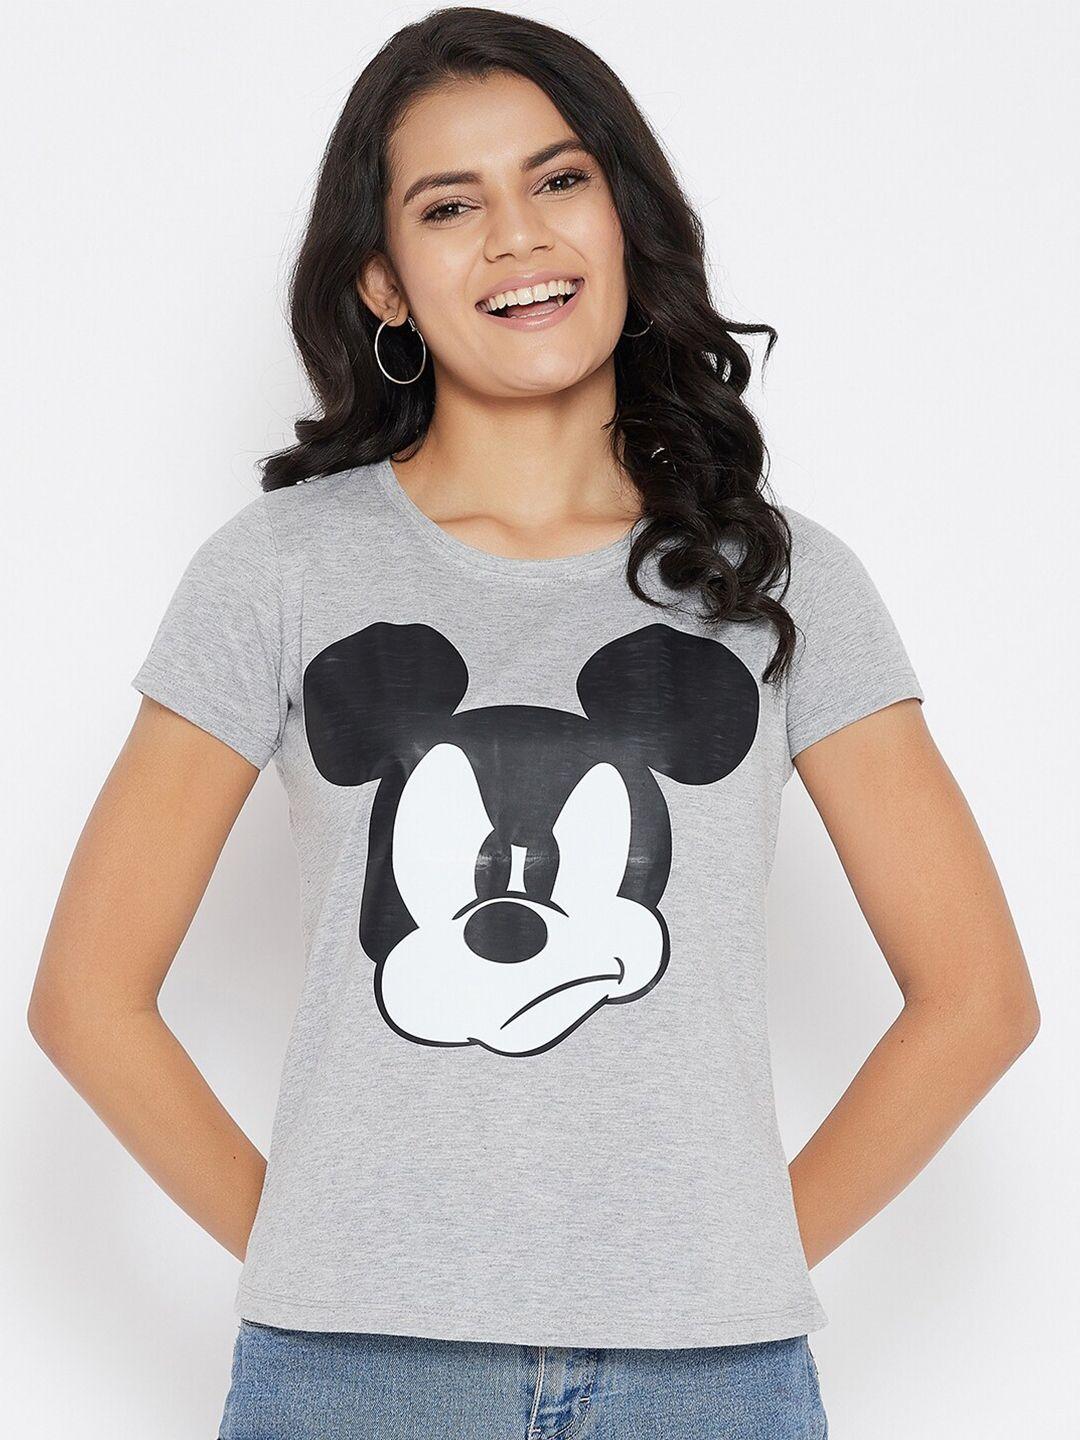 disney by wear your mind women grey graphic printed t-shirt